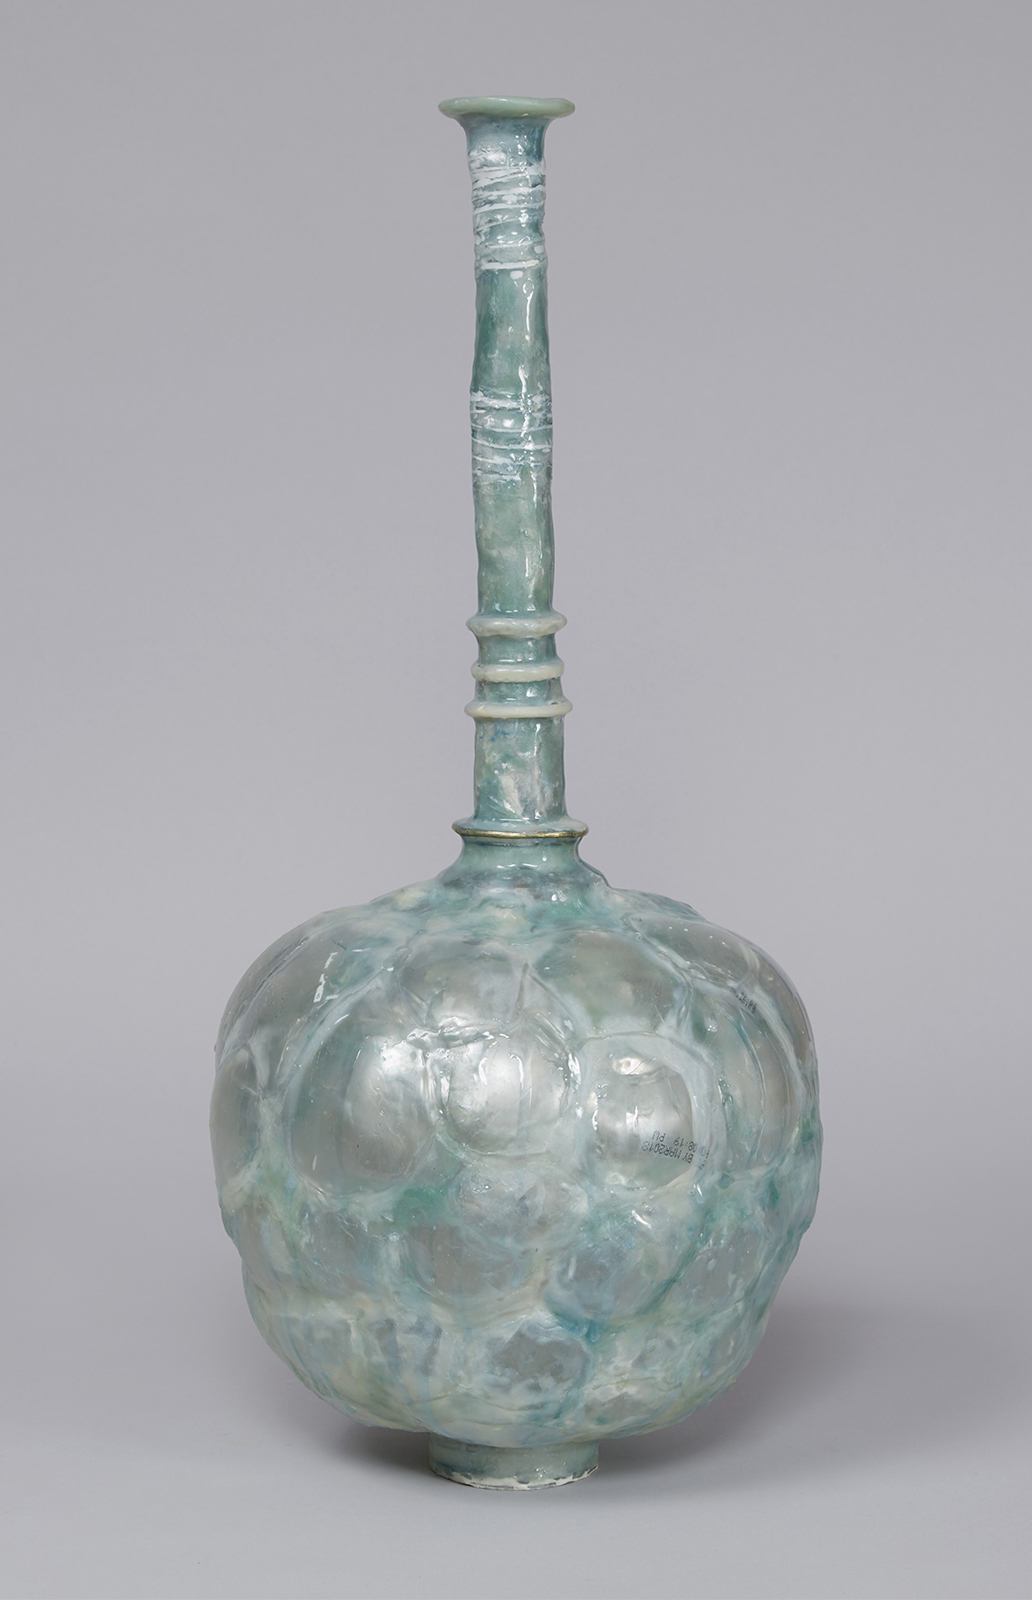 Vessel with long neck and brass ring